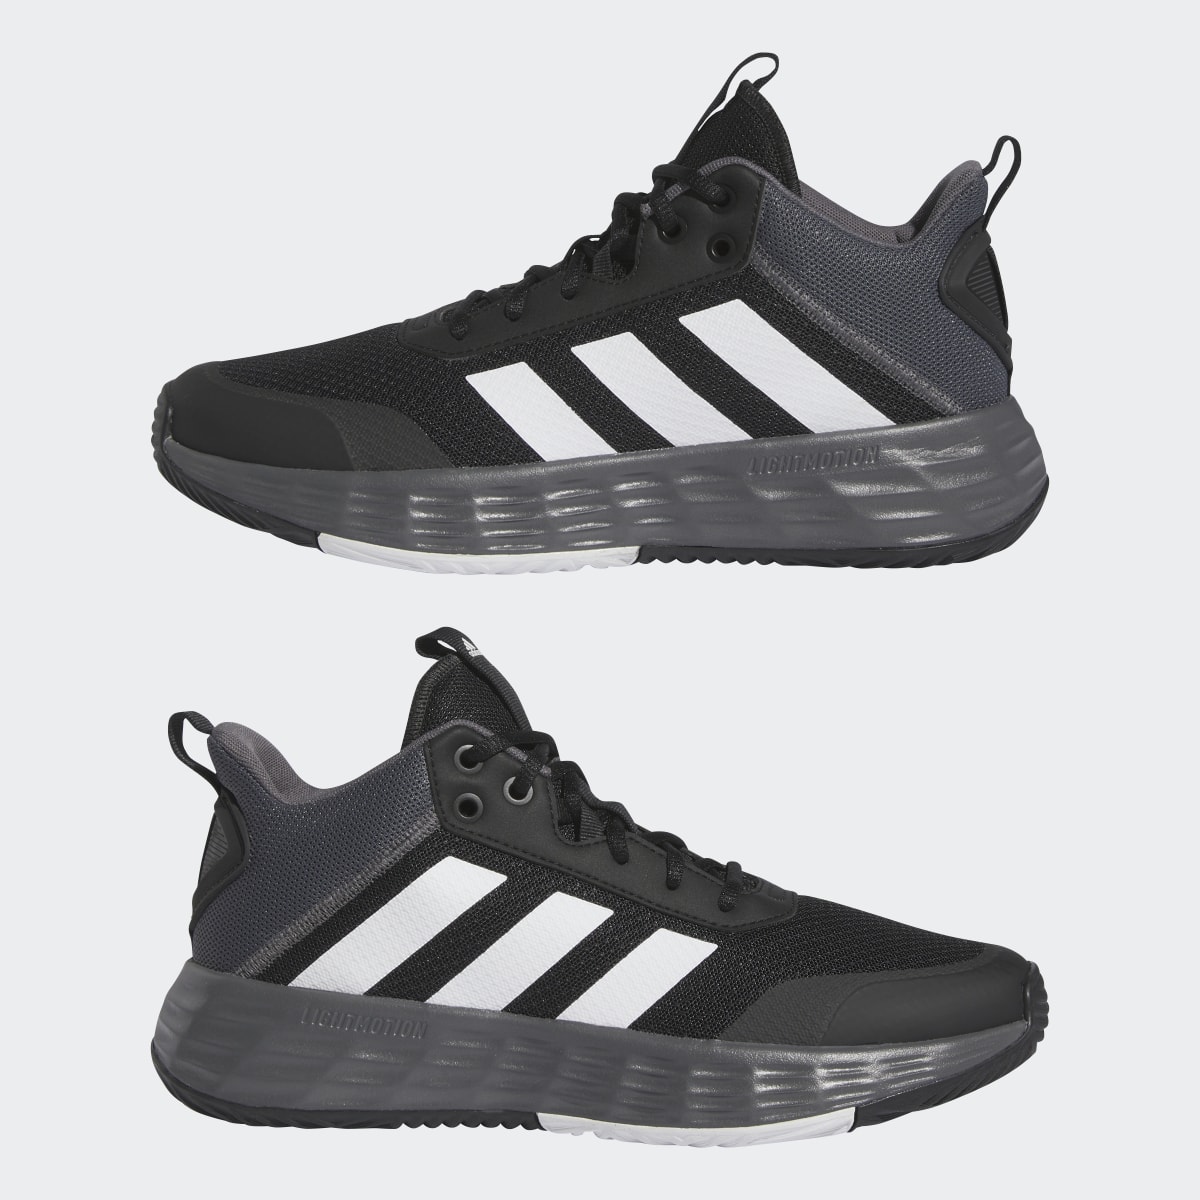 Adidas Ownthegame Basketball Shoes. 8